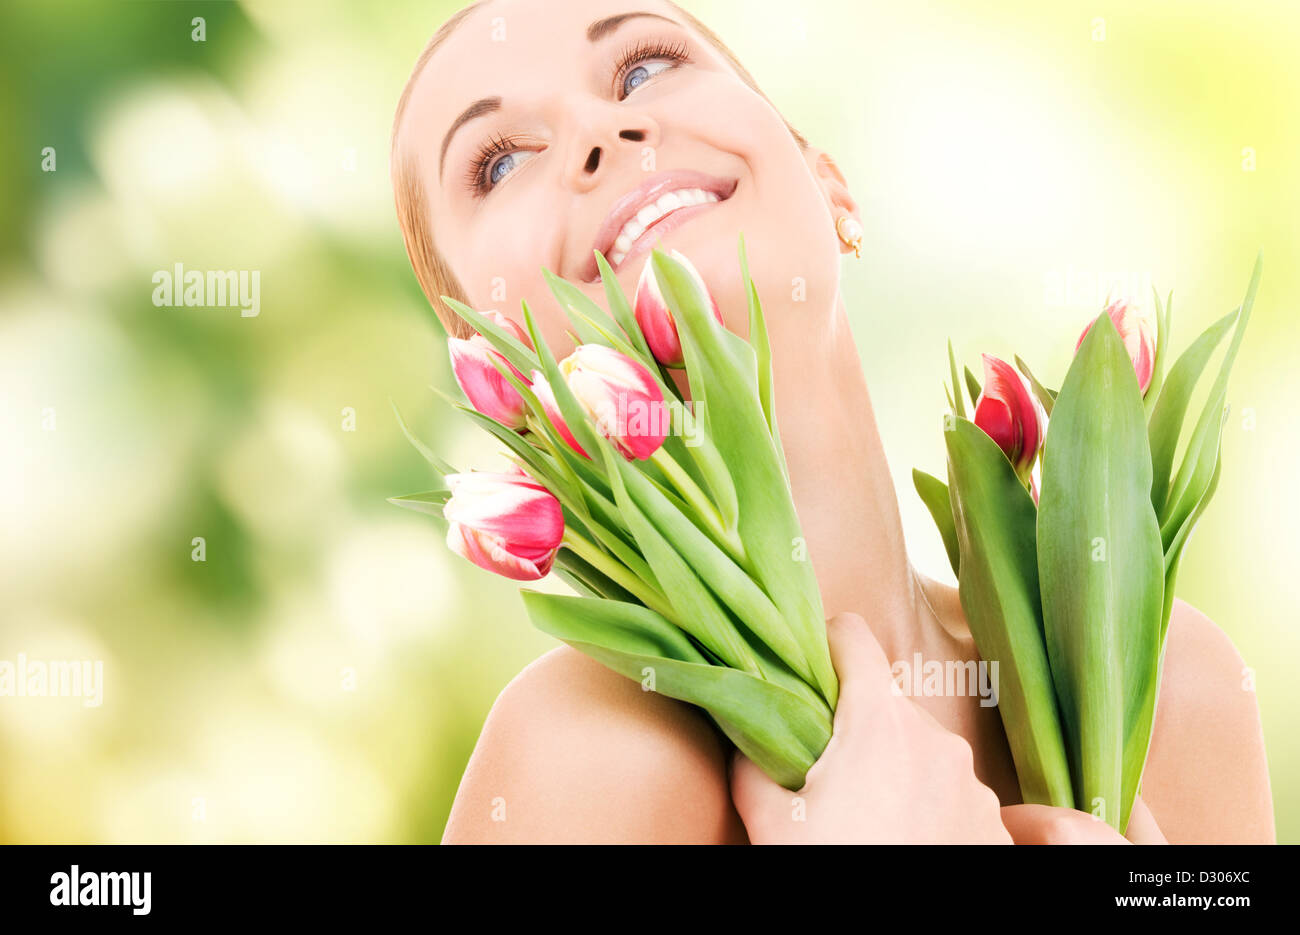 happy woman with flowers Stock Photo